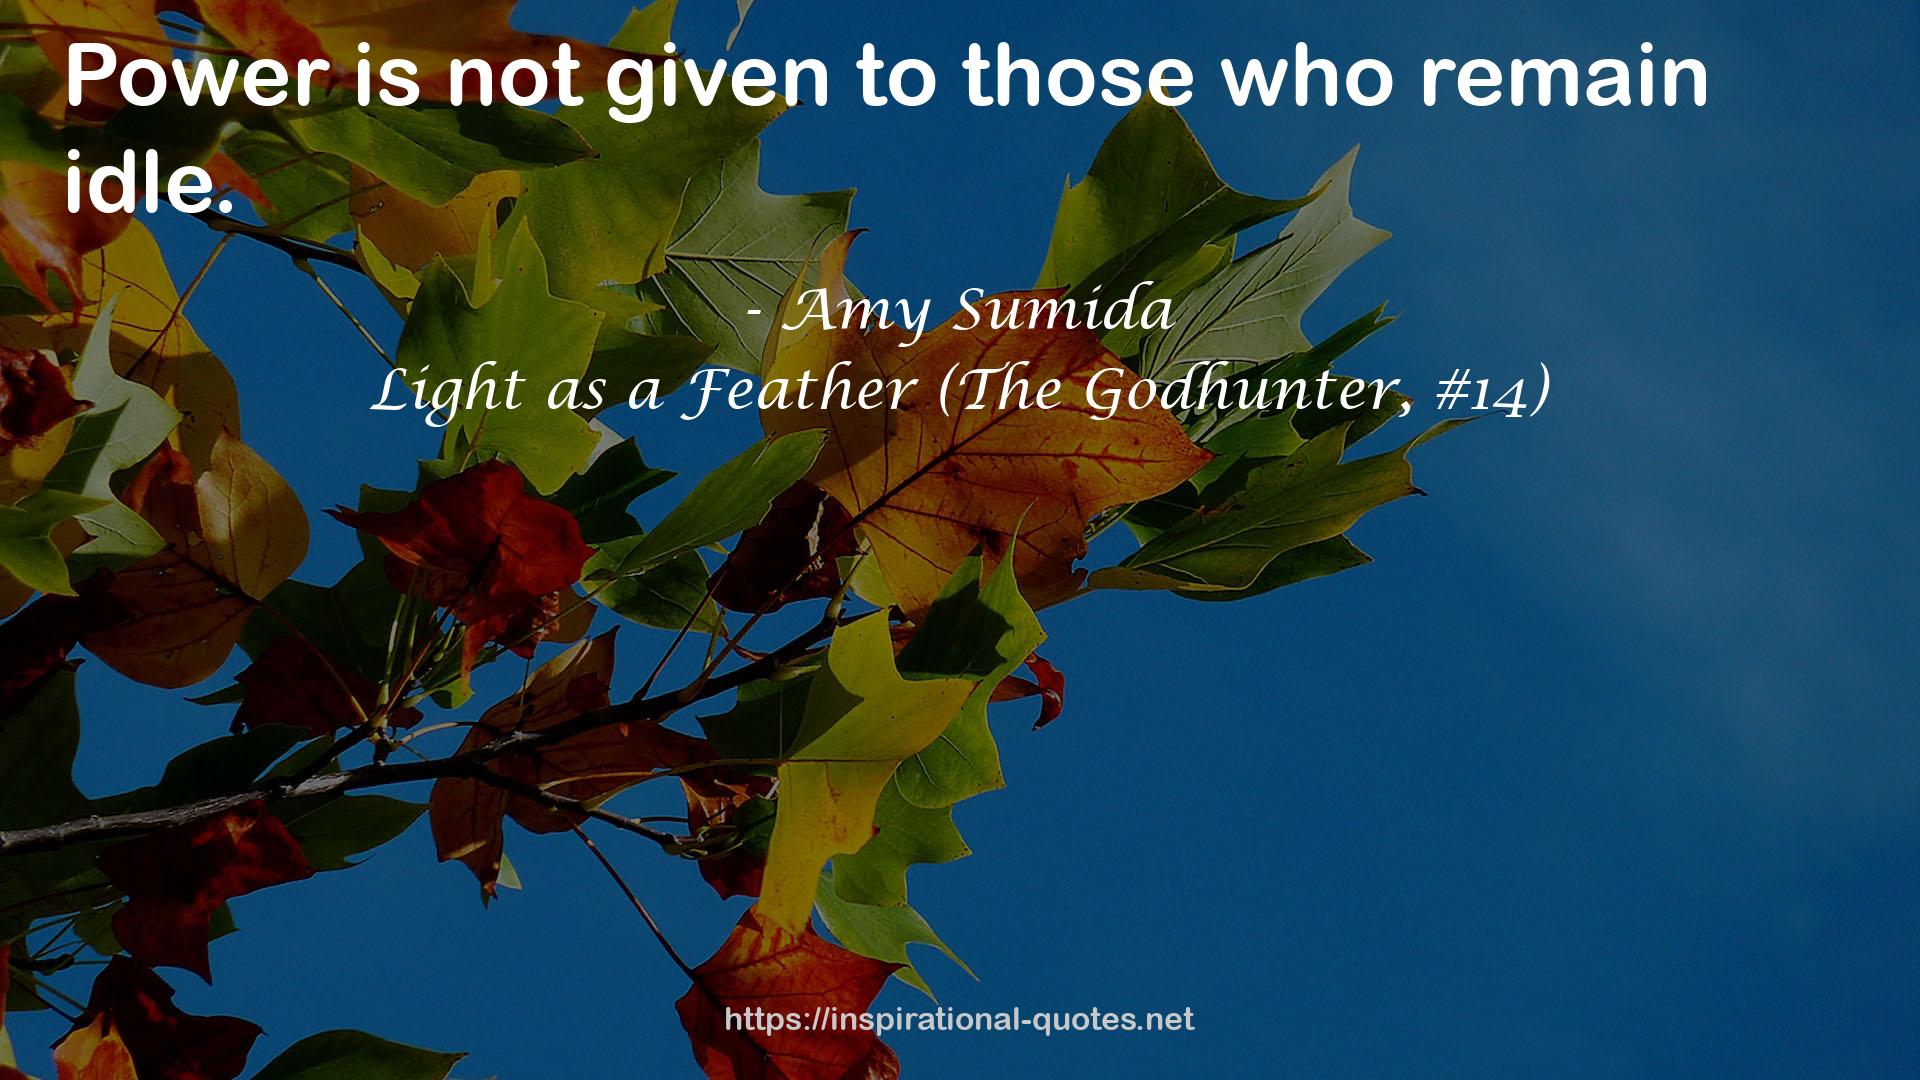 Light as a Feather (The Godhunter, #14) QUOTES